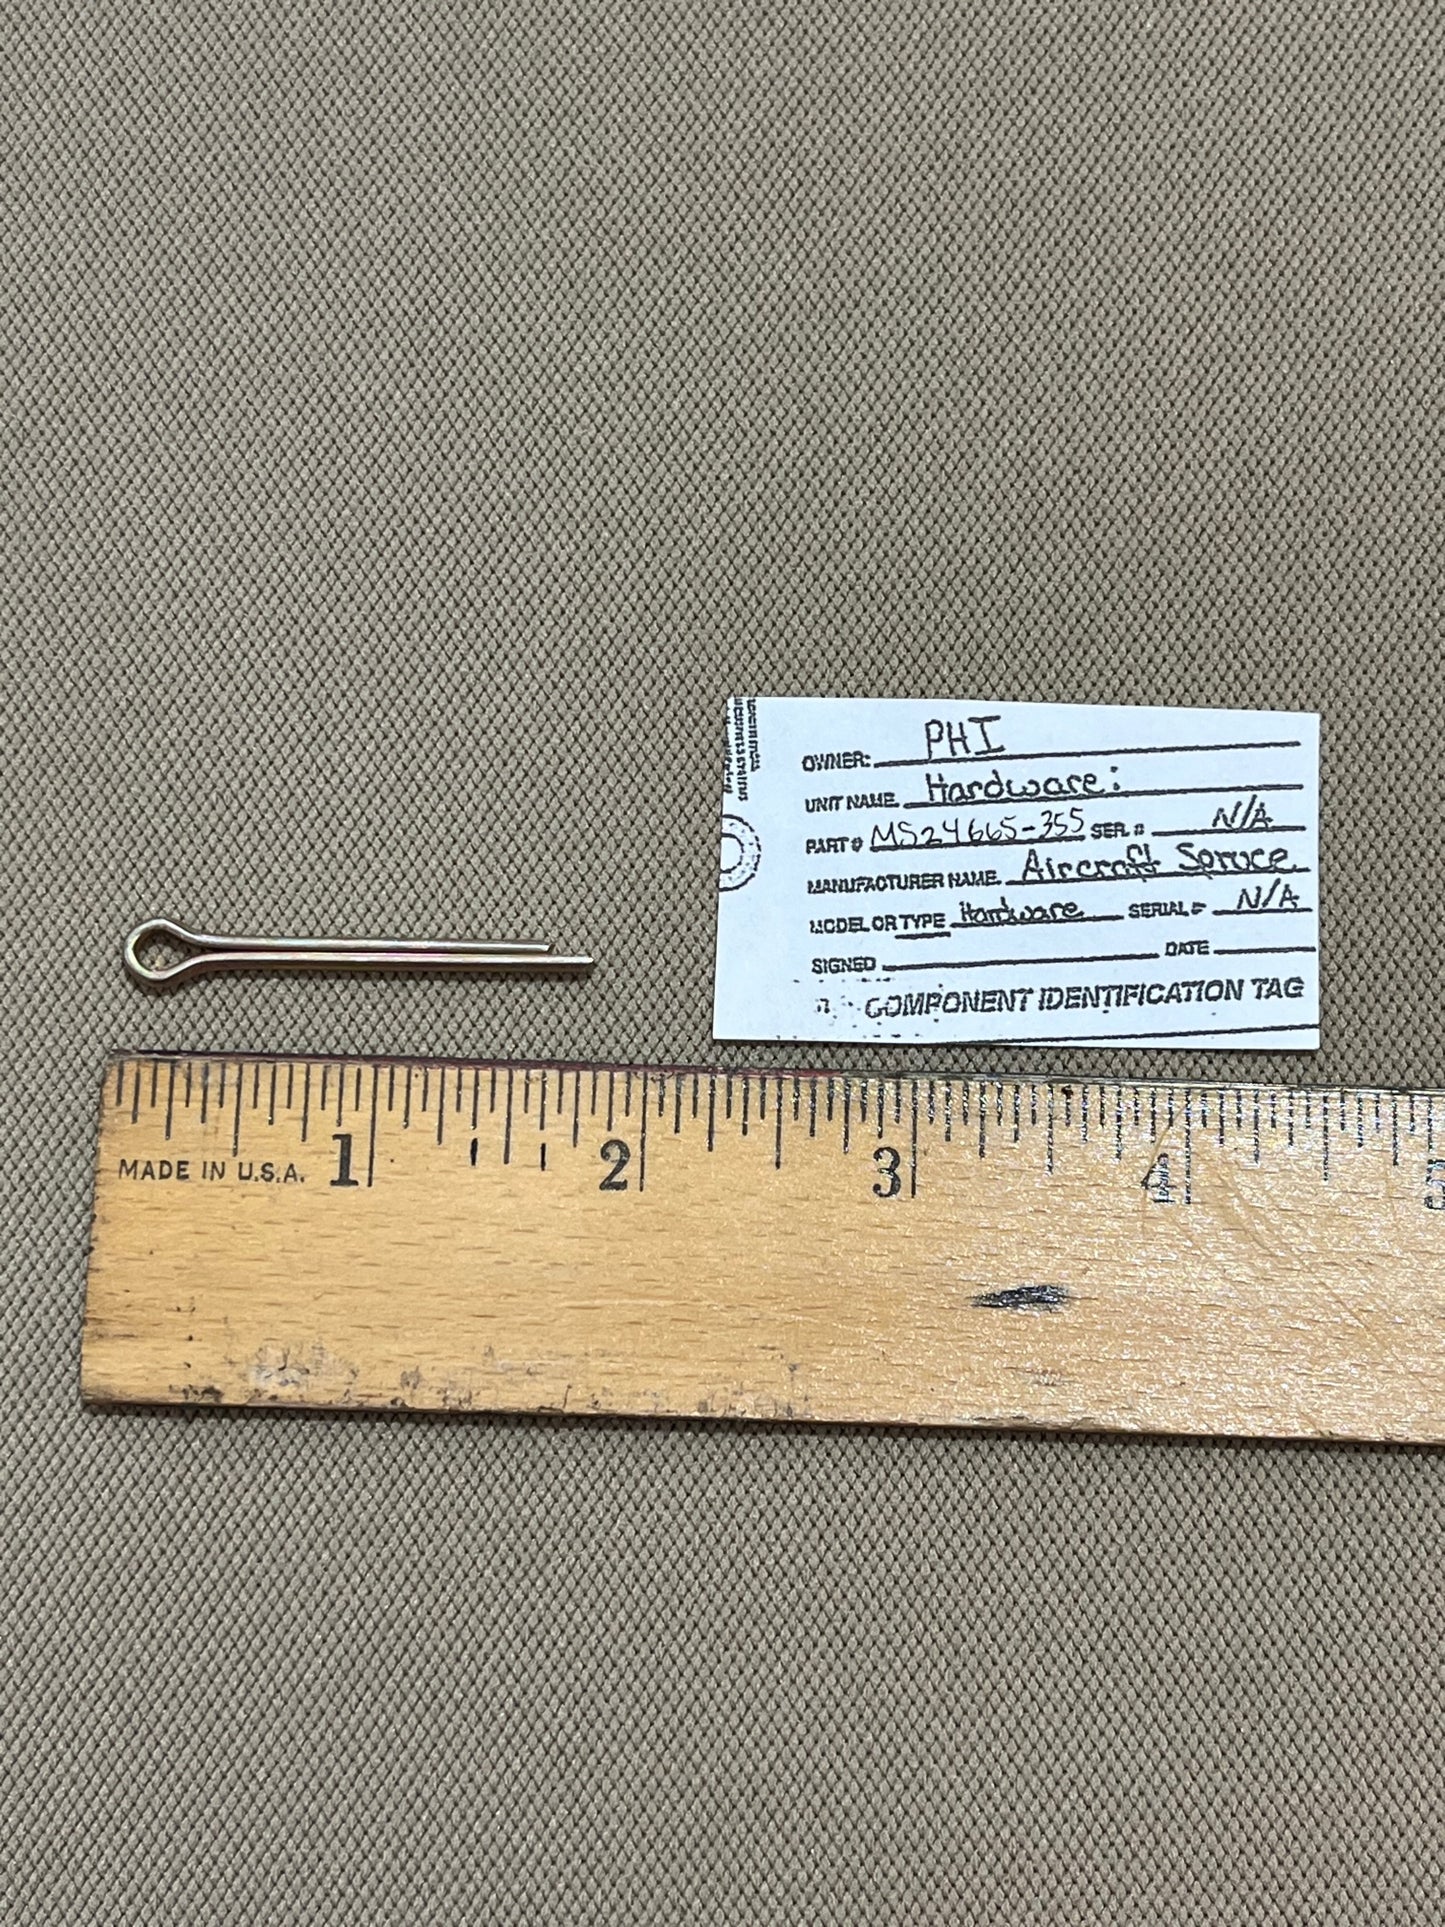 MS24665-355 COTTER PIN